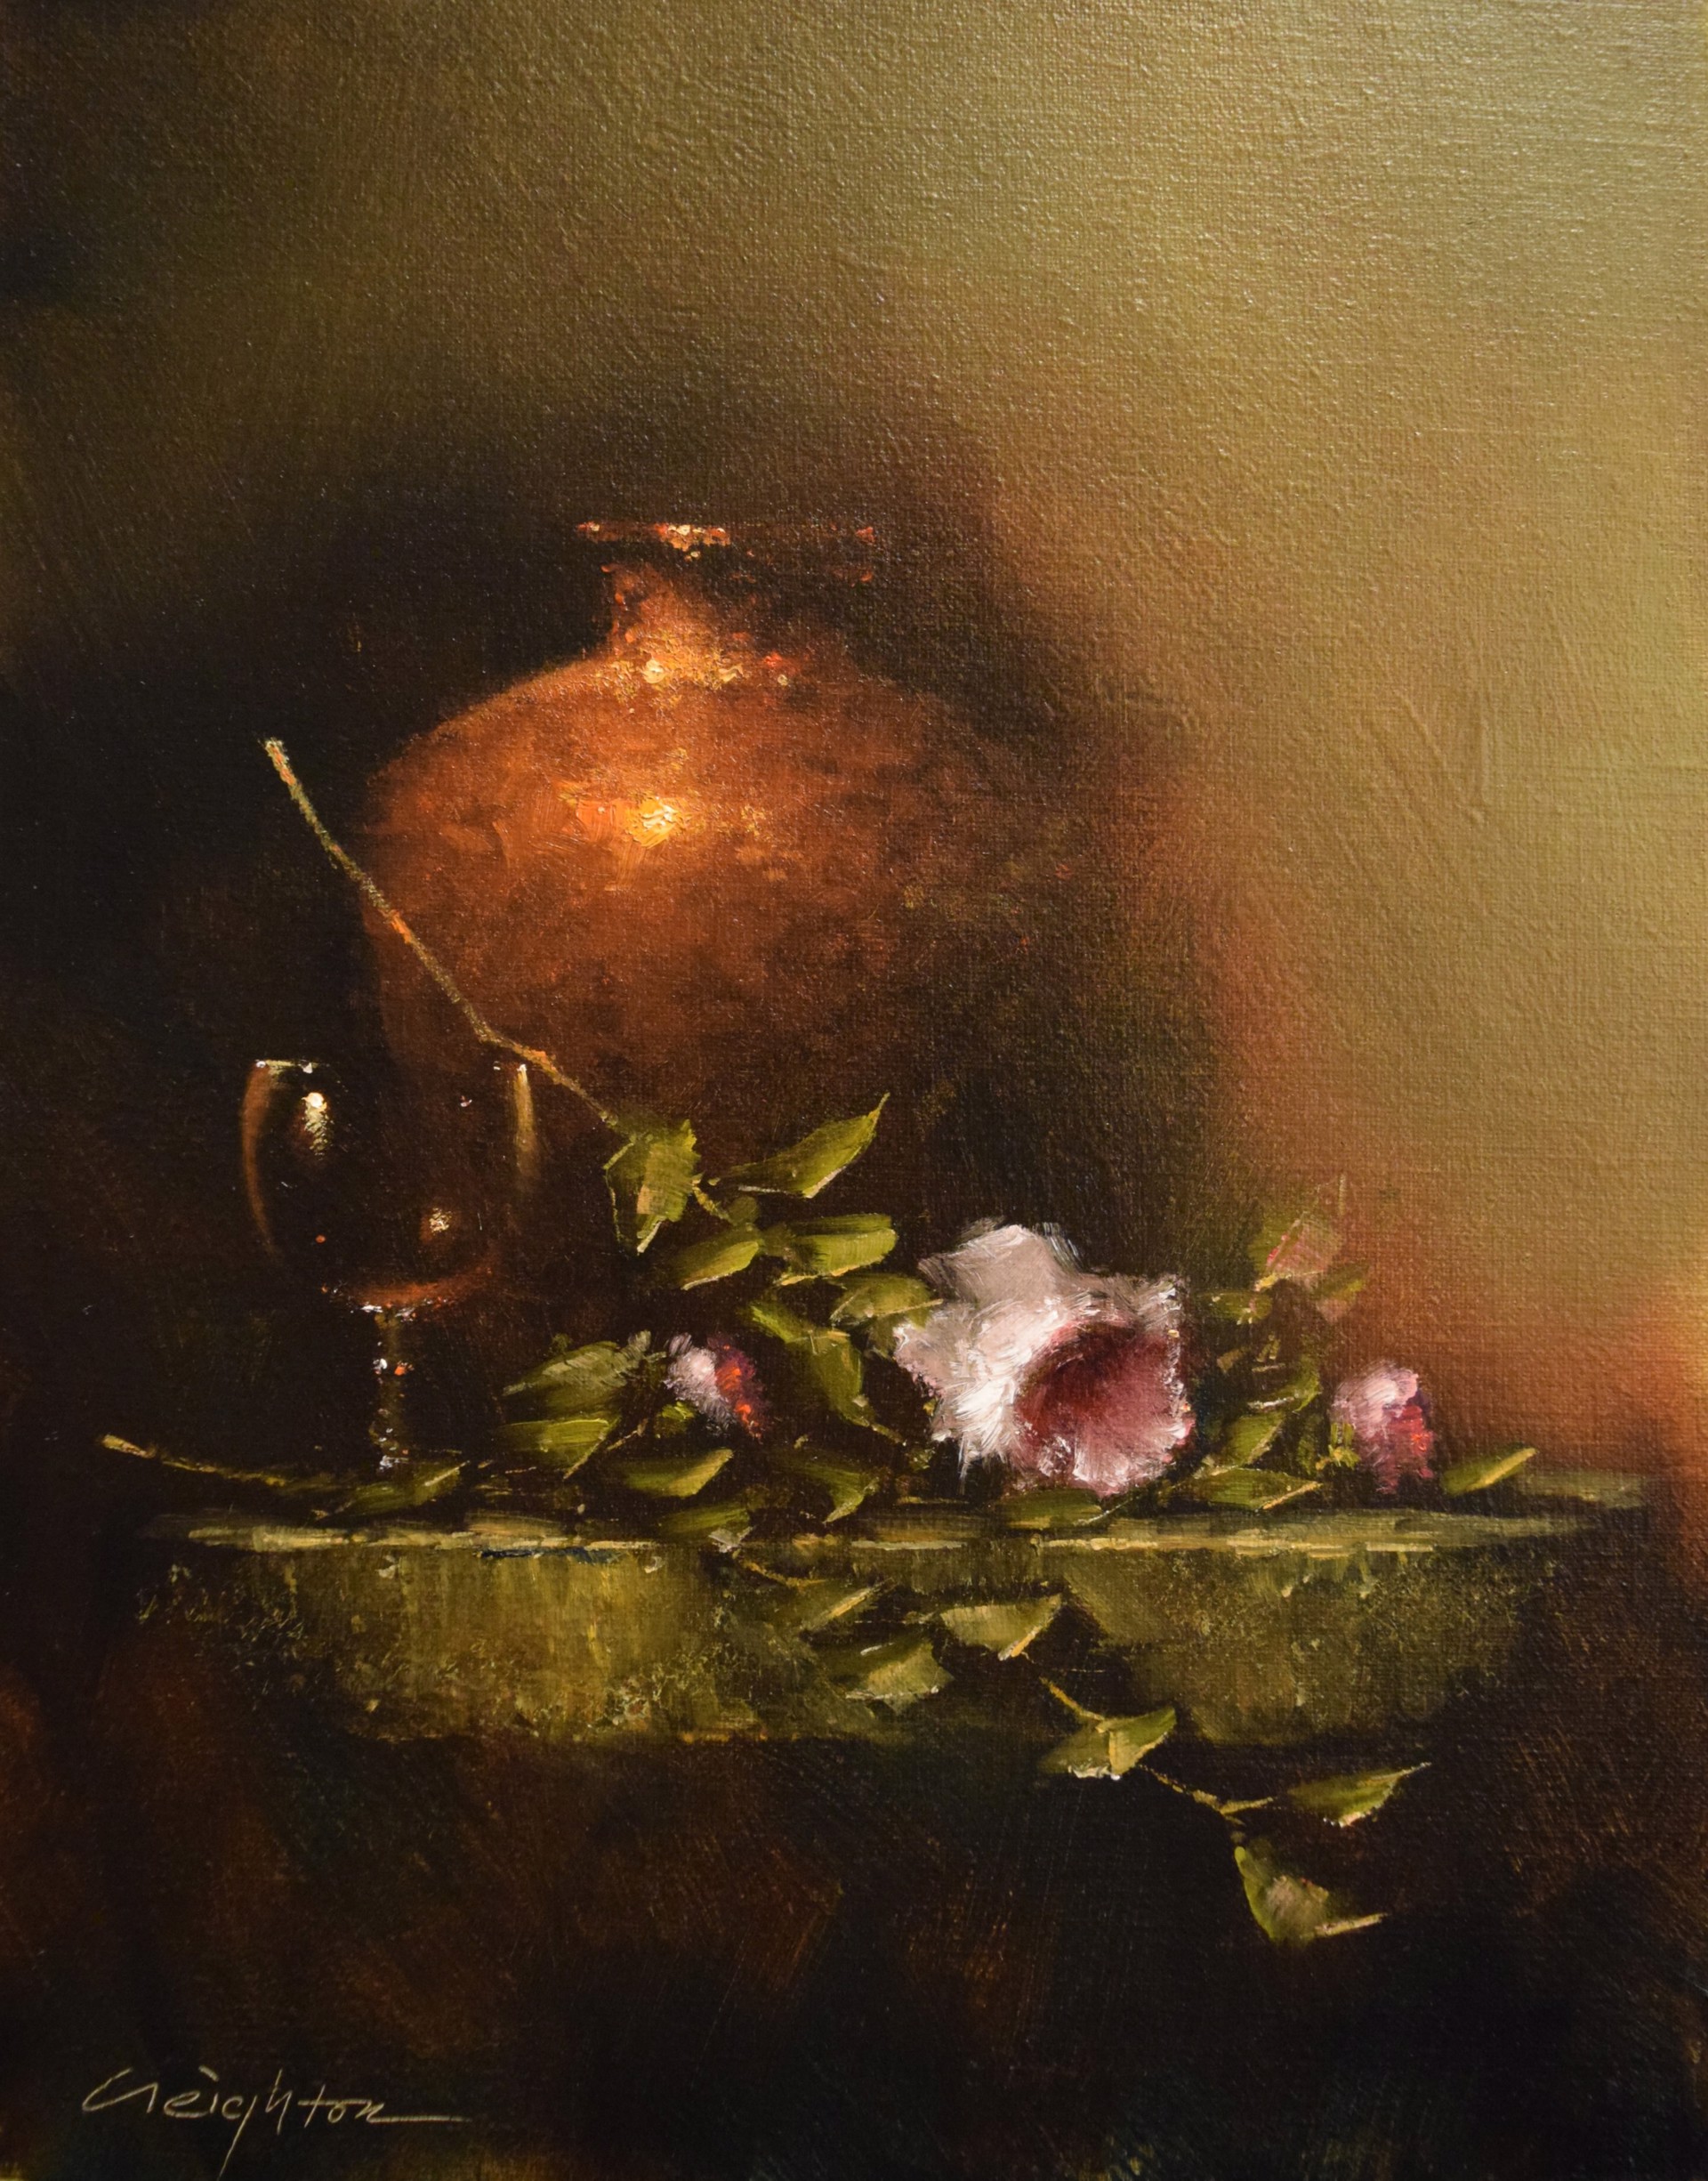 Floral with Umber Pot by Steven Creighton